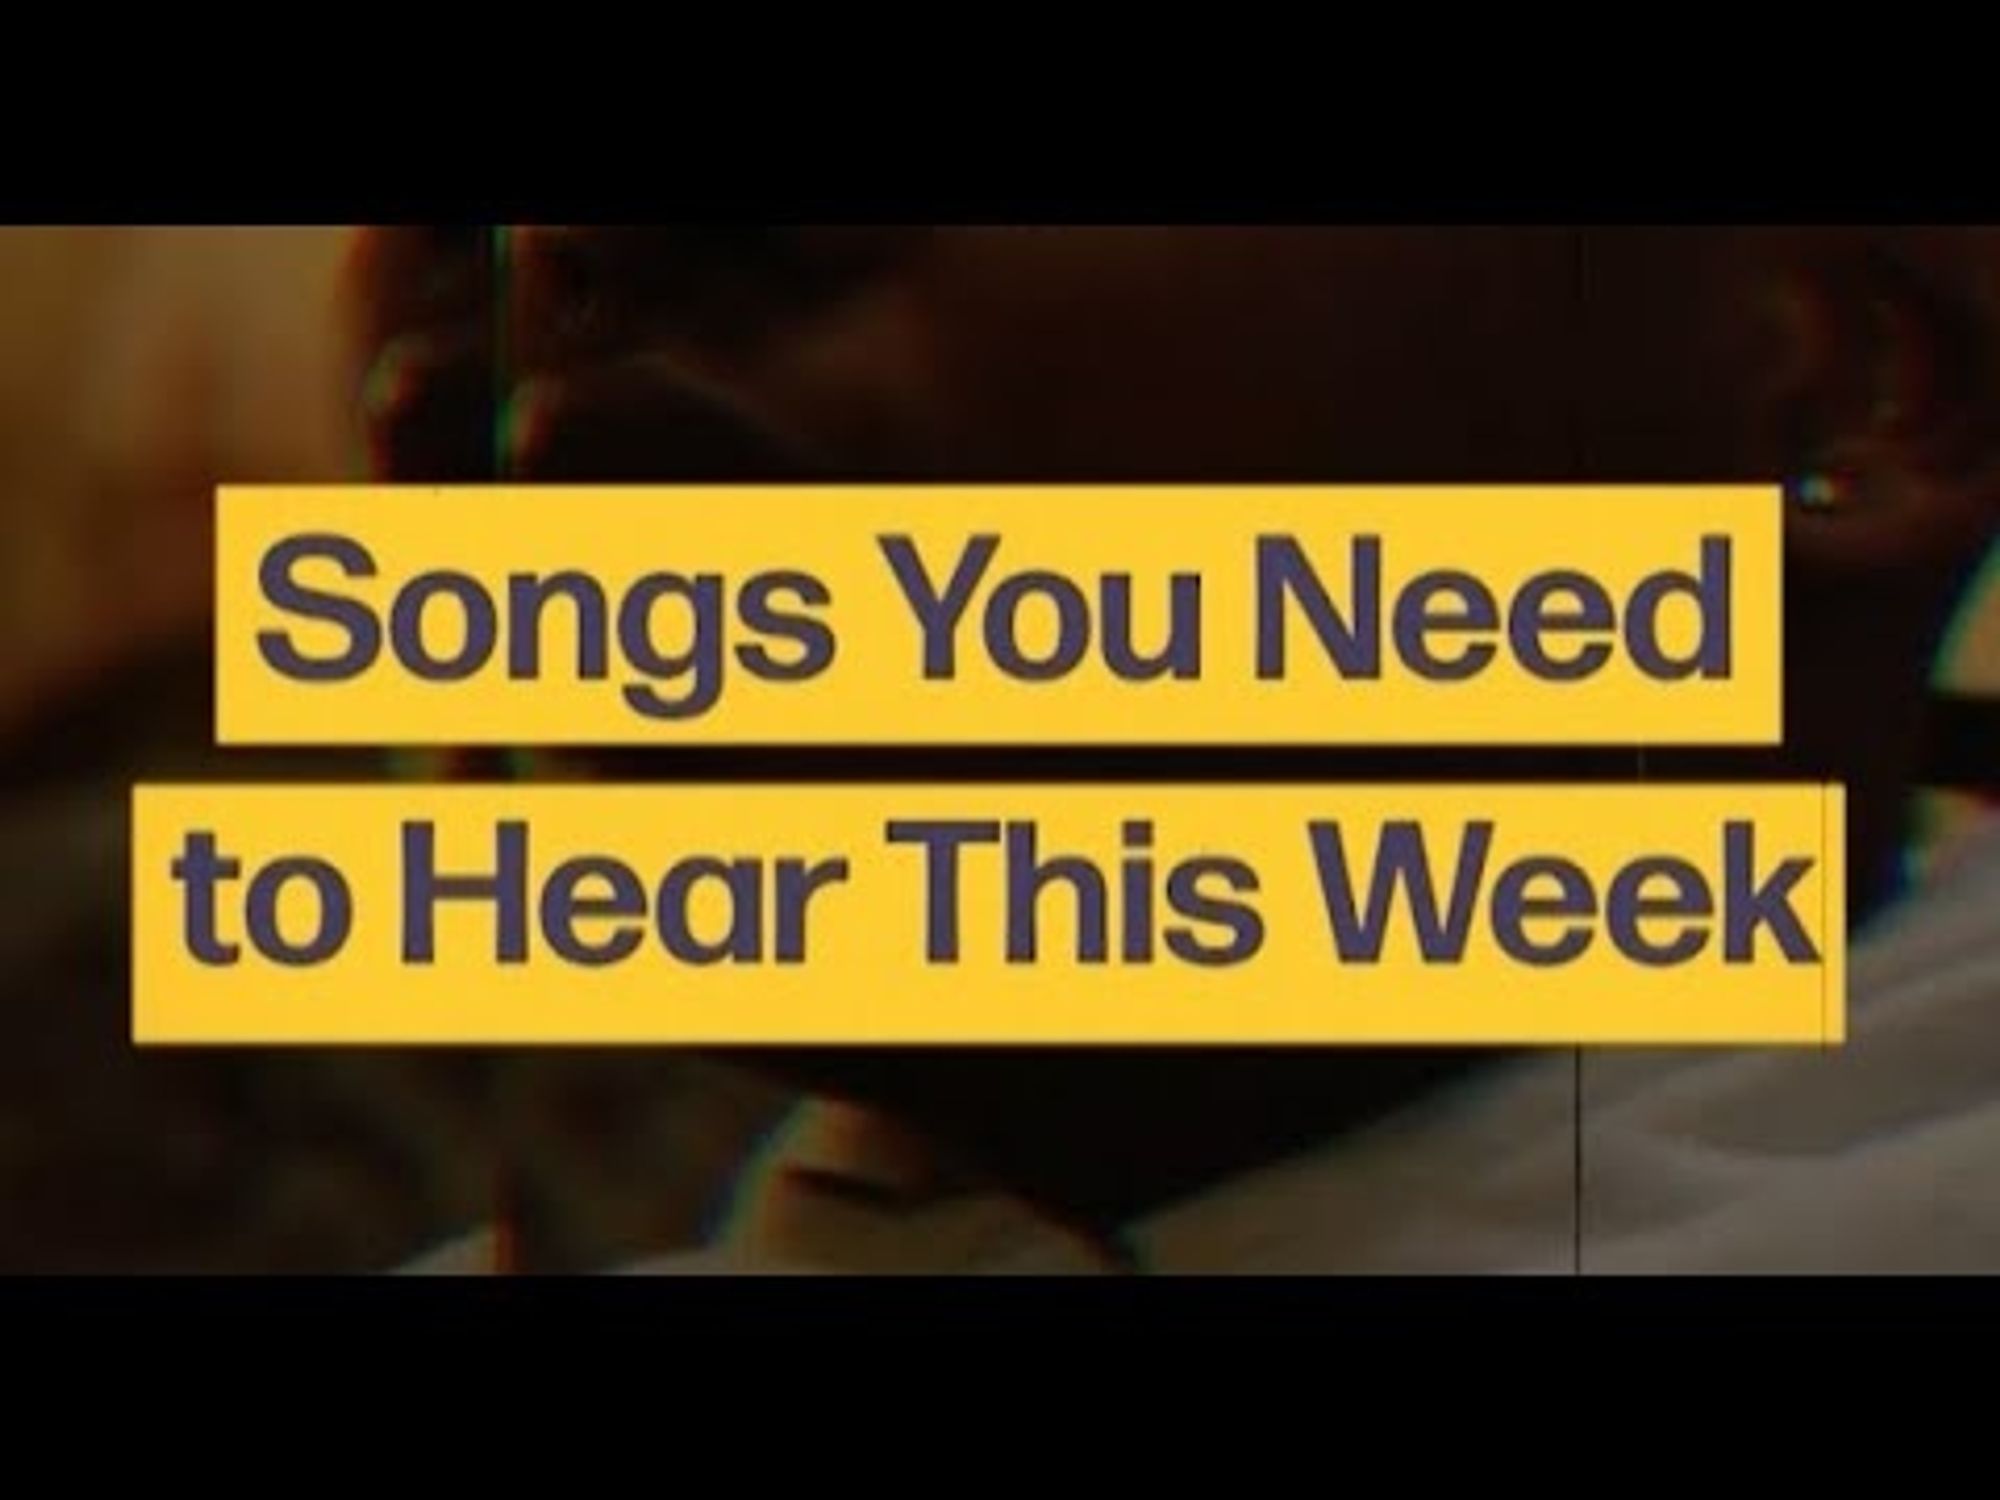 The 10 Songs You Need to Hear This Week